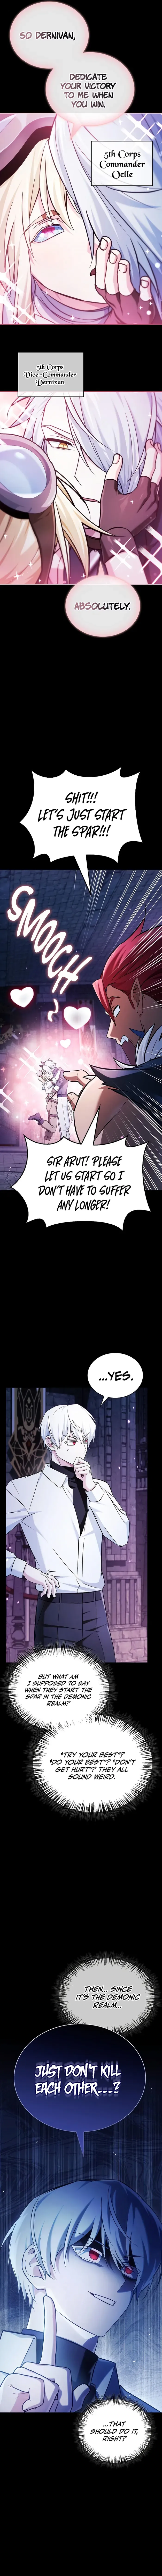 I’m Not That Kind of Talent Chapter 48 page 8